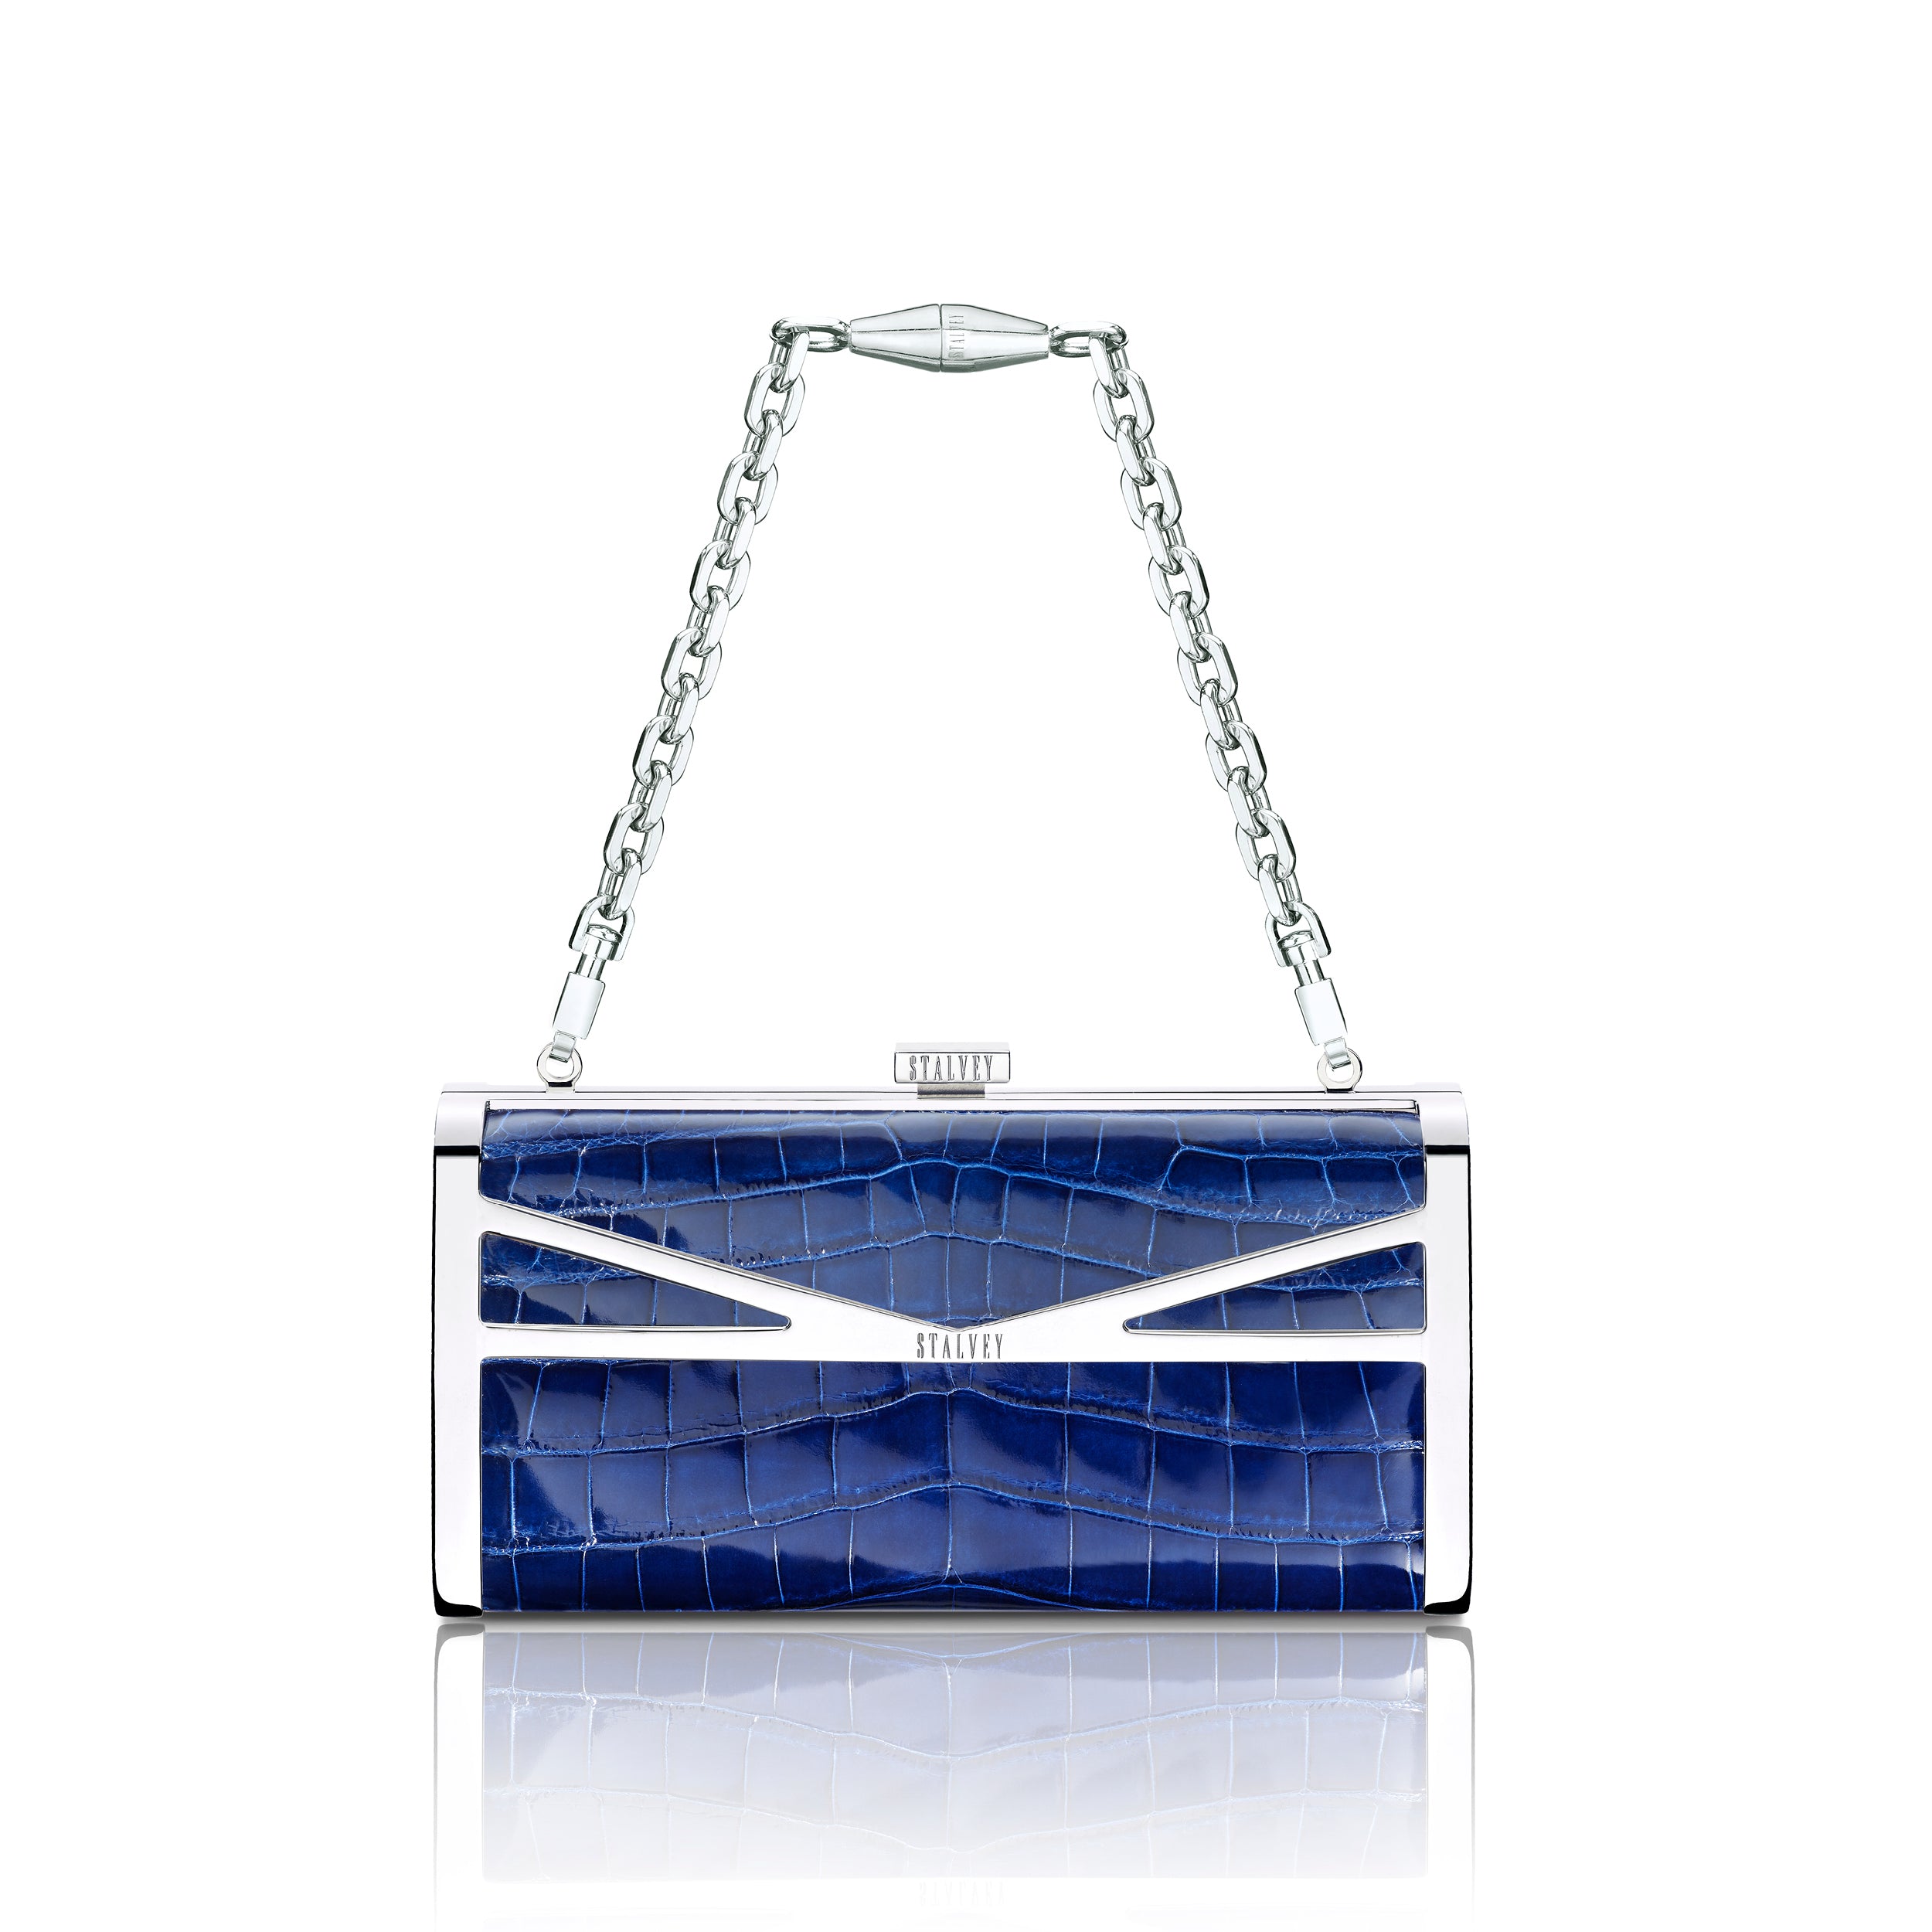 STALVEY Square Clutch in Cobalt Blue Alligator with Palladium Hardware Front View with Chain